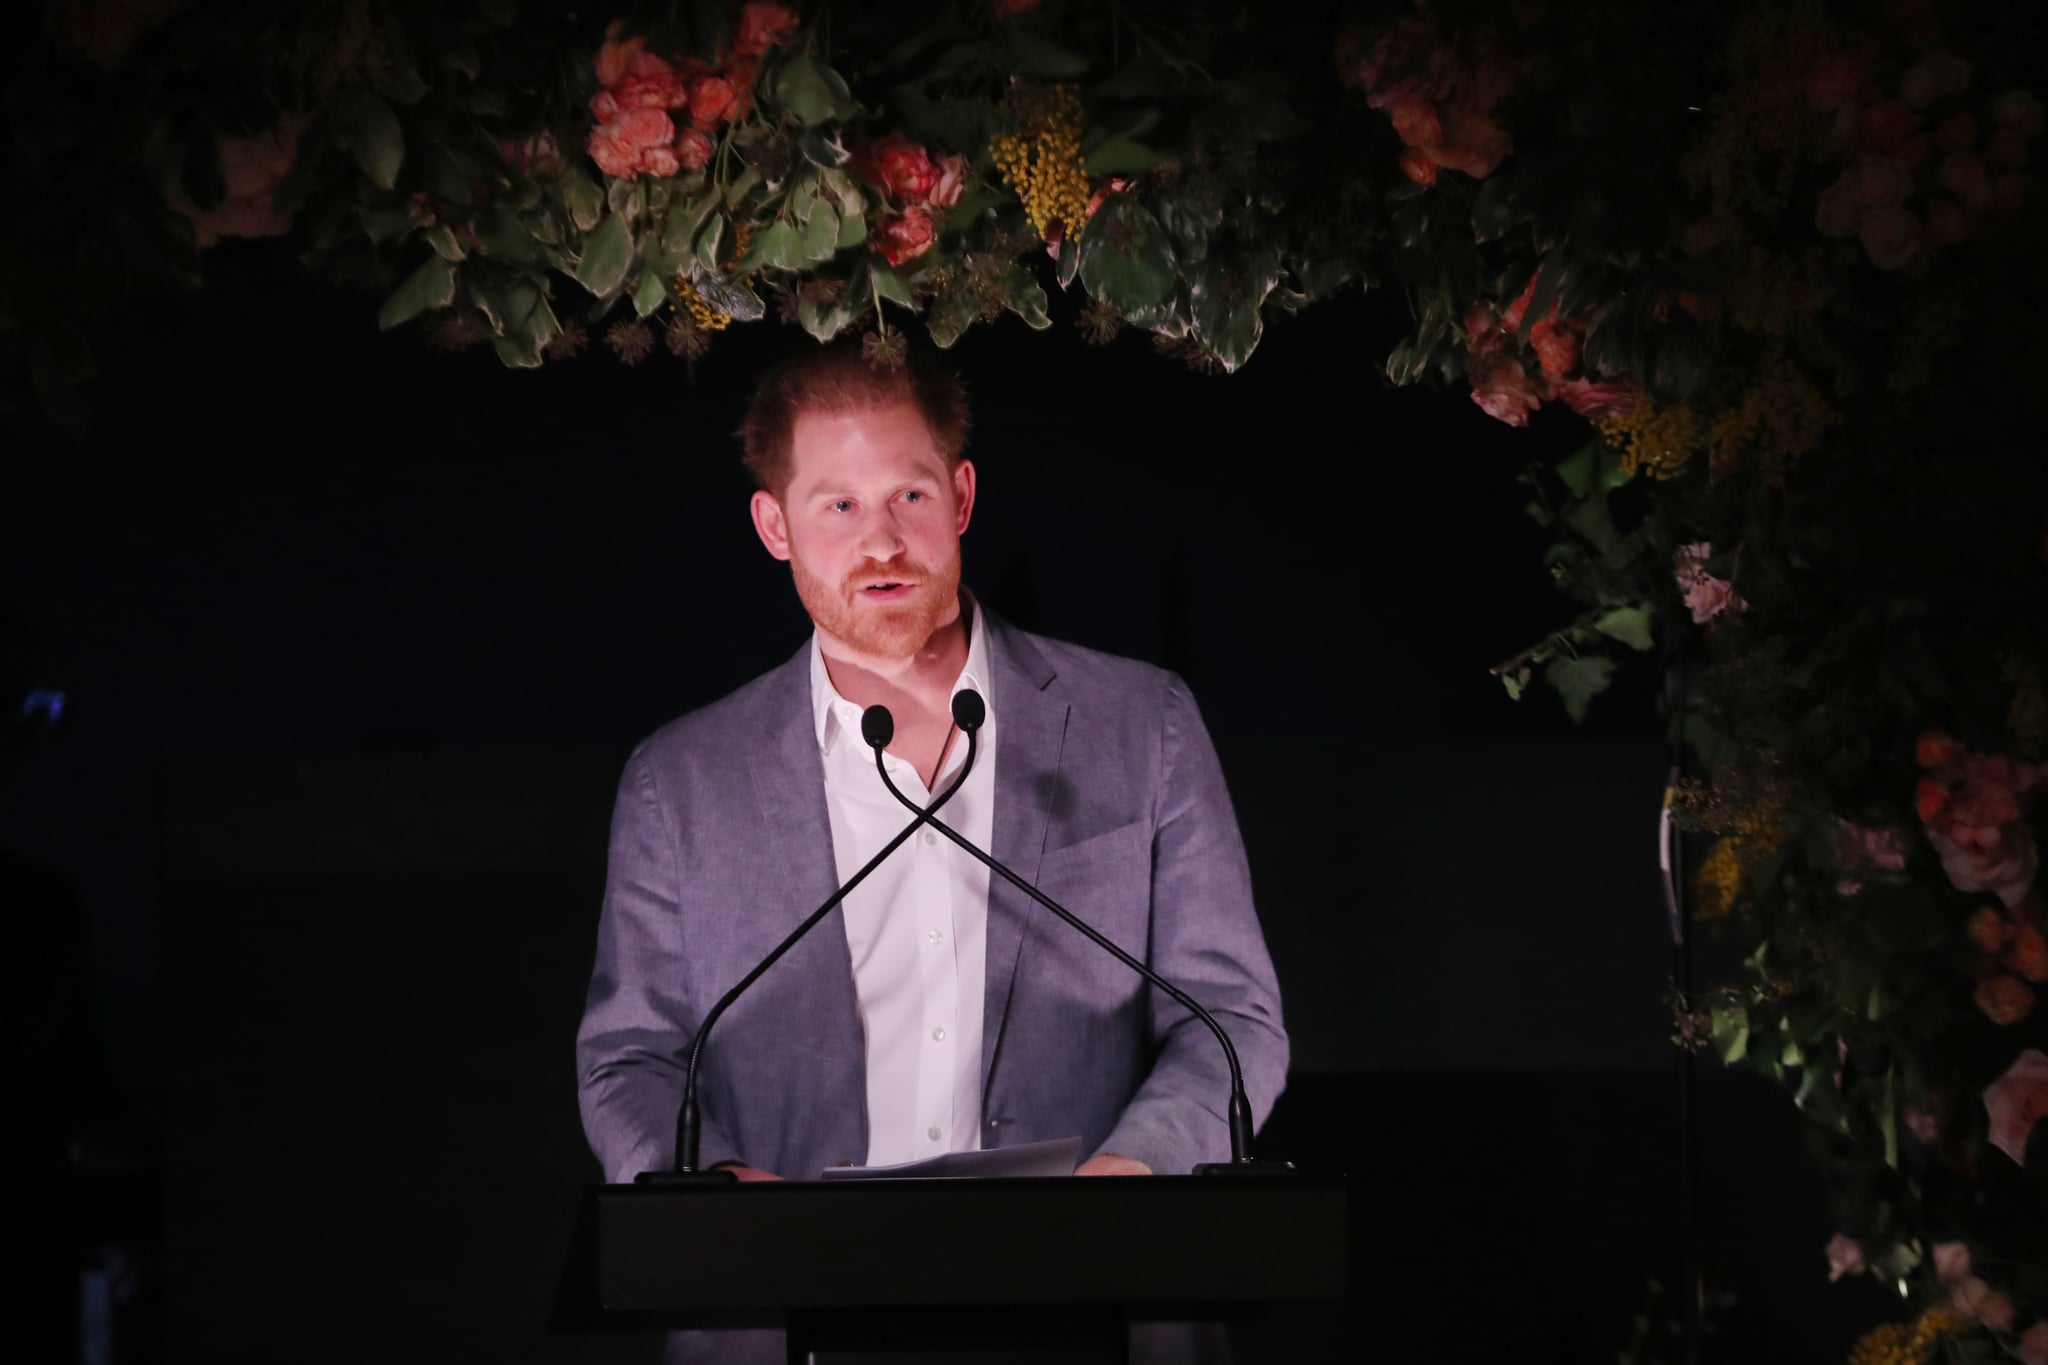 LONDON, ENGLAND - JANUARY 19:  The Duke of Sussex makes a speech as Sentebale held an event on January 19, 2020, hosted by The Caring Foundation, to raise funds for Sentebale